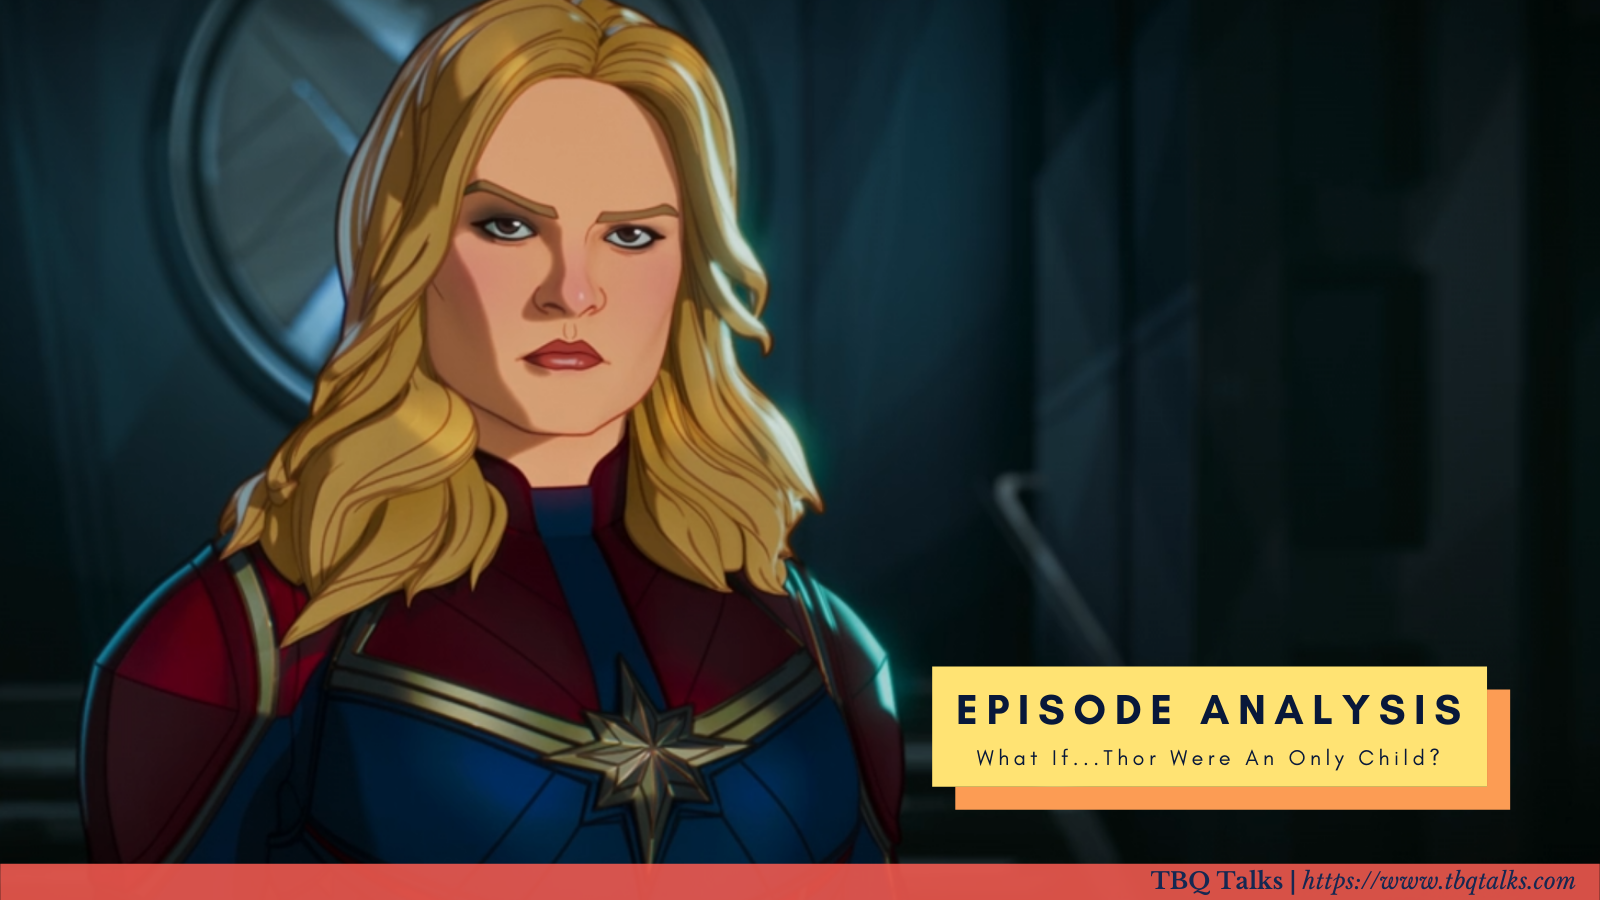 Episode Analysis: What if... Thor Were An Only Child?